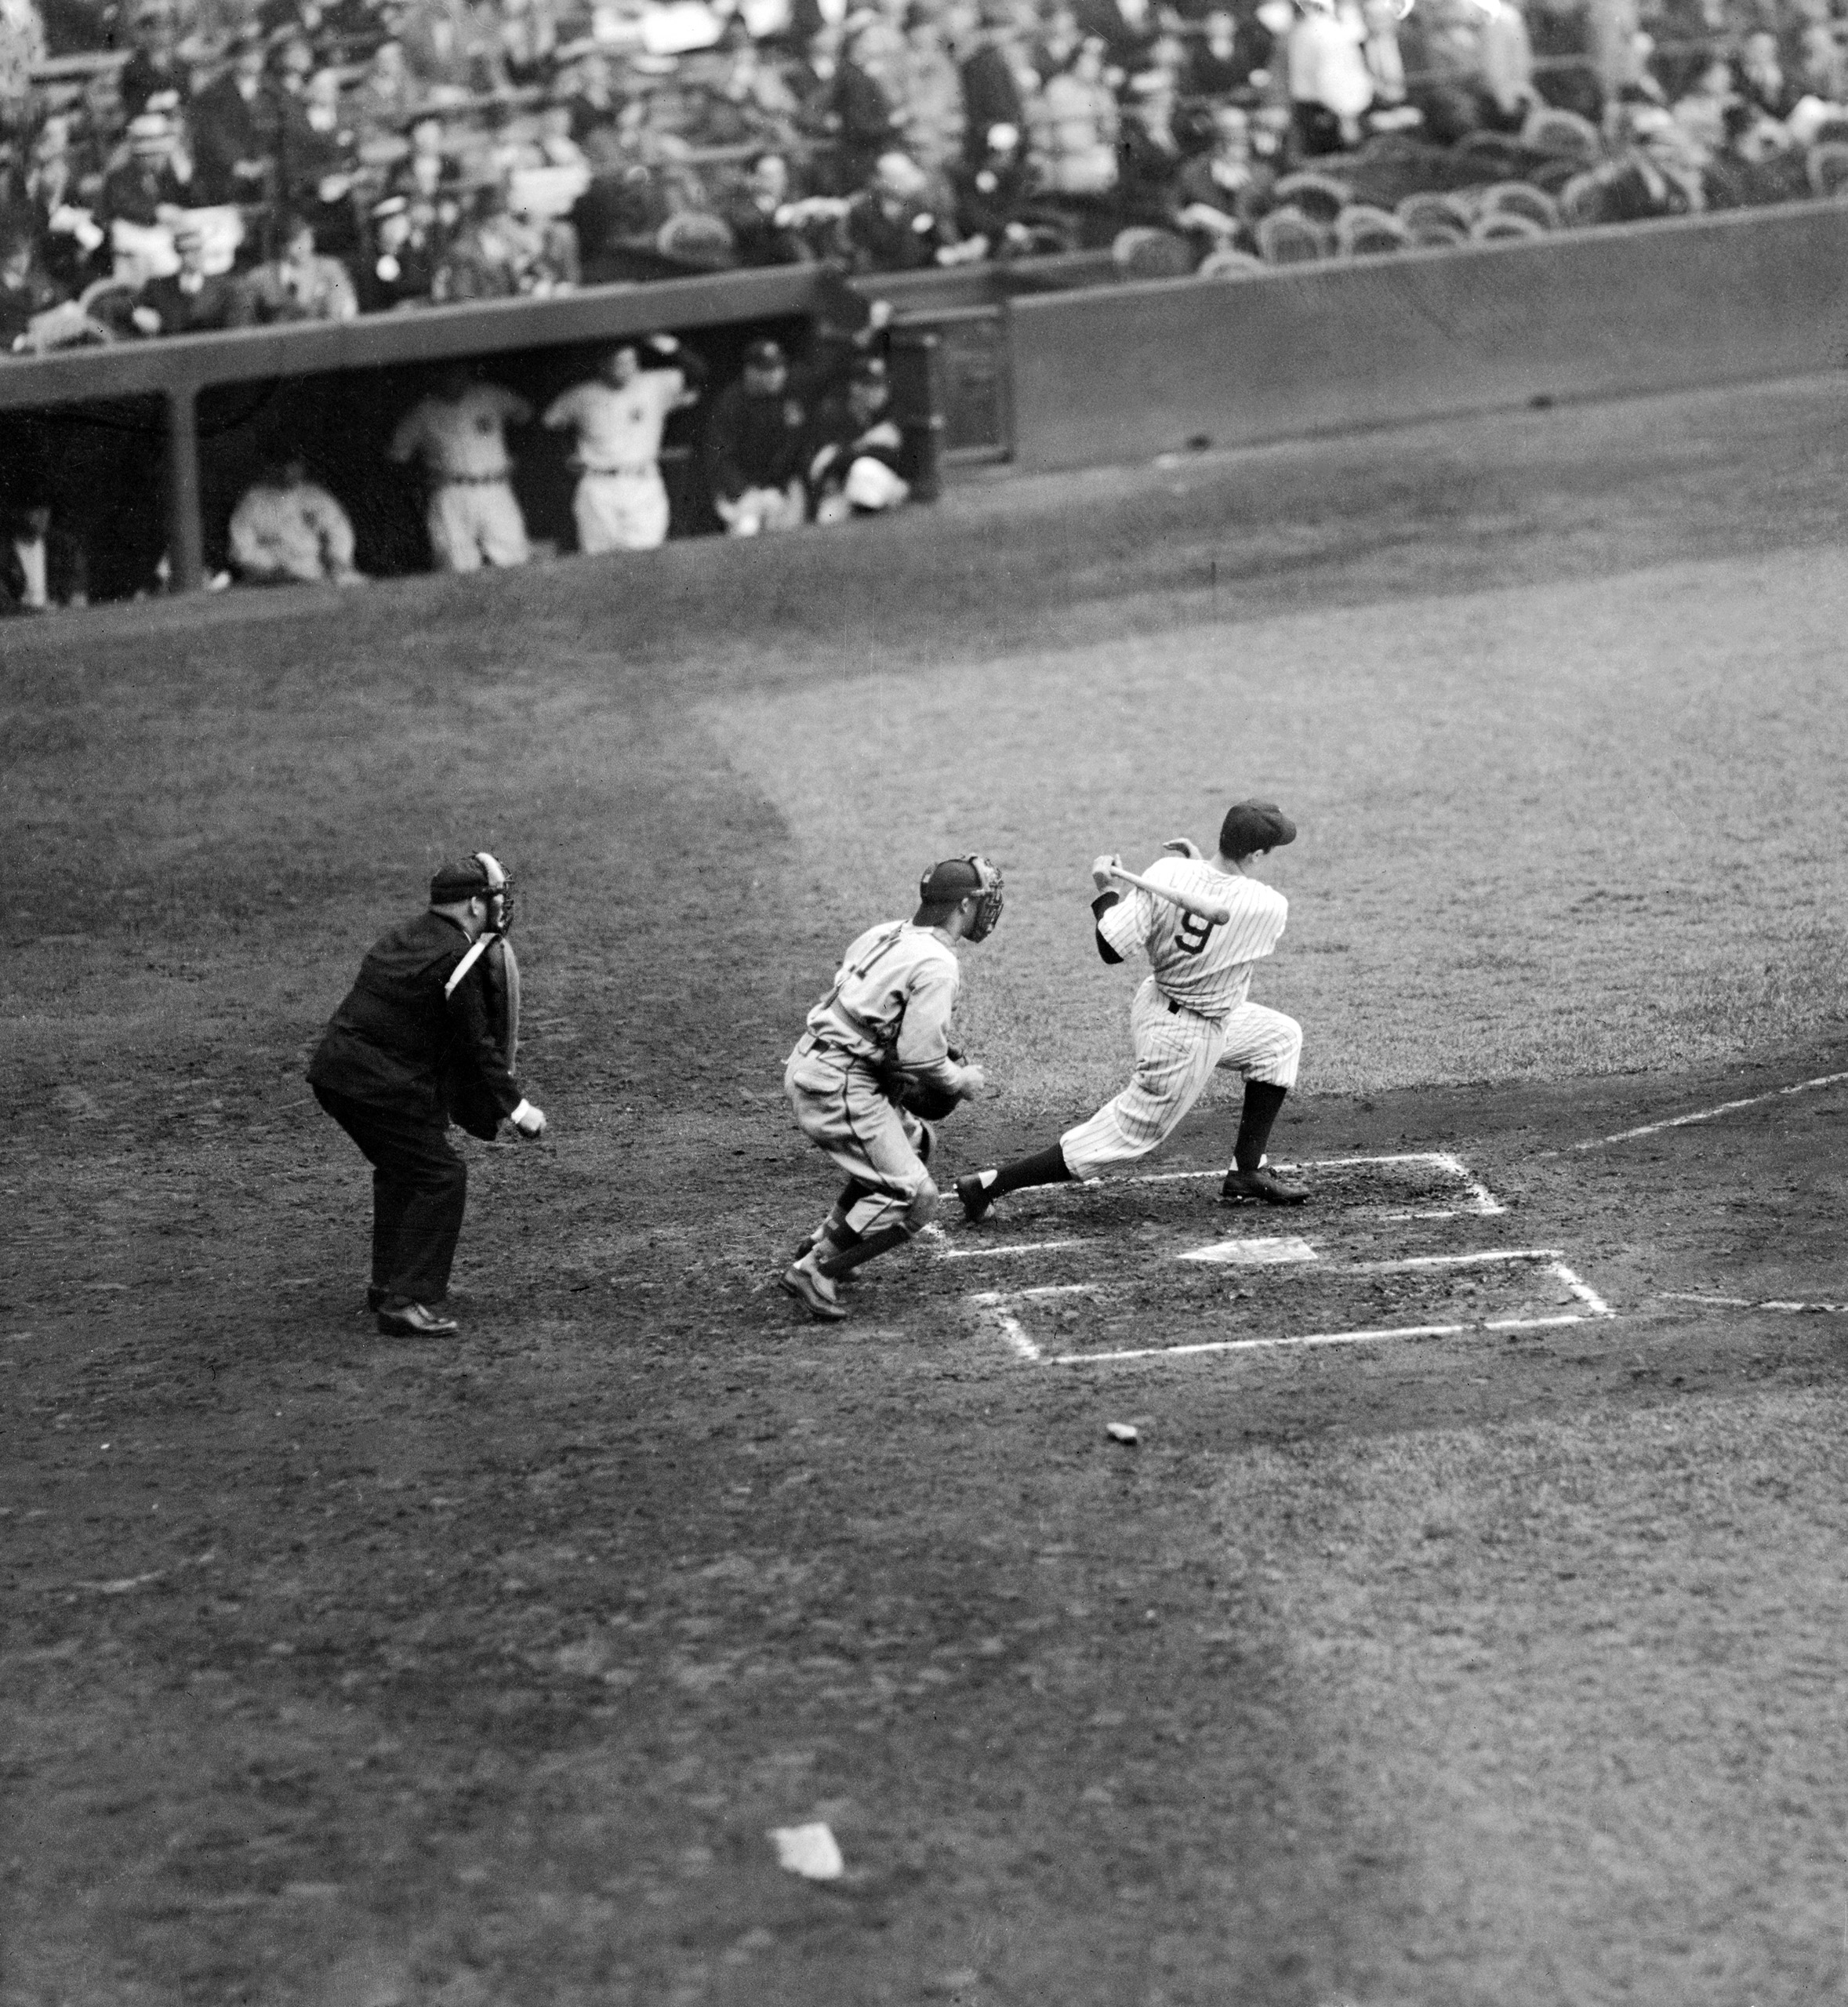 Joe DiMaggio, former West Coast star, purchased by the Yankees for $75,000 and kept out of the lineup by his "hot-foot," saw action in a big league ball game for the first time today, when he faced the St. Louis Browns. Joe is shown here as he hit safely in the second inning of the game. May 3, 1936.